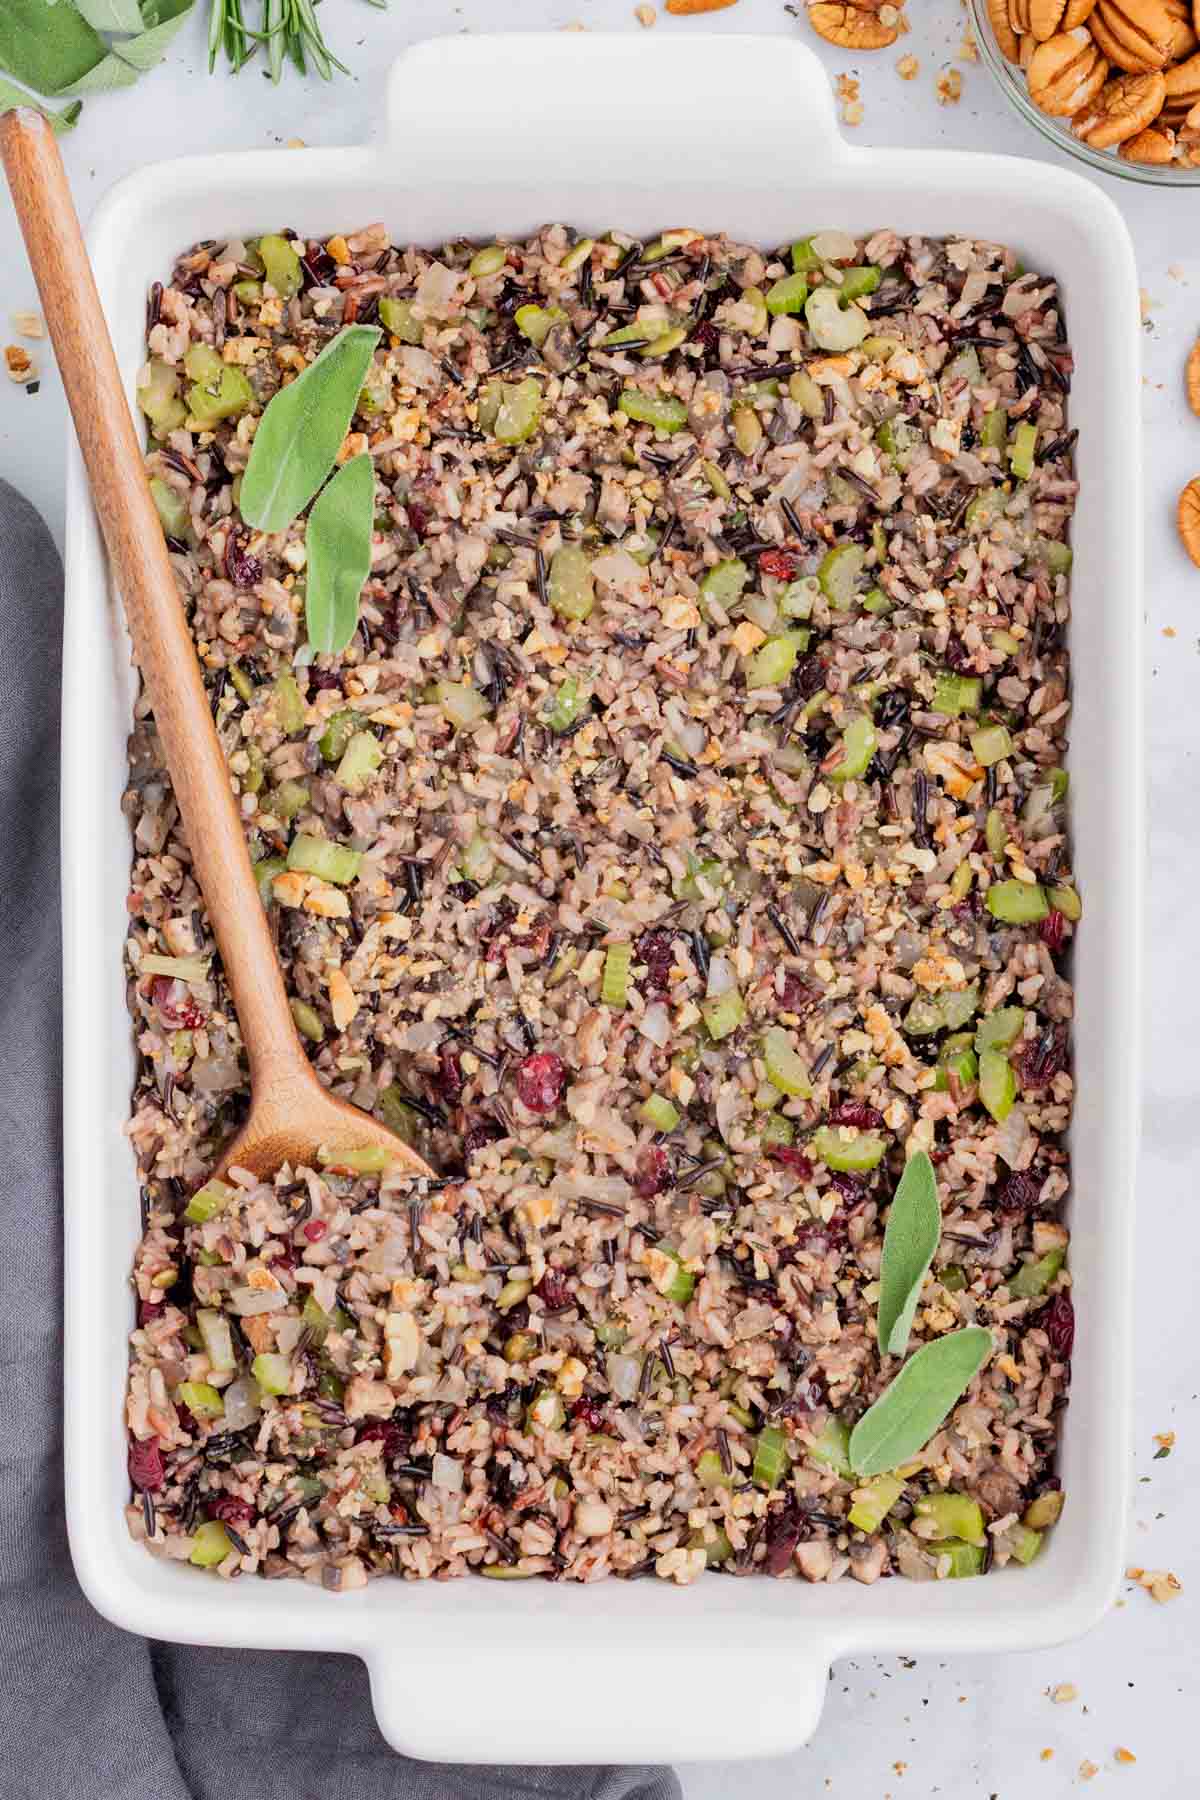 Wild rice stuffing is spread in a baking dish for a nice presentation.